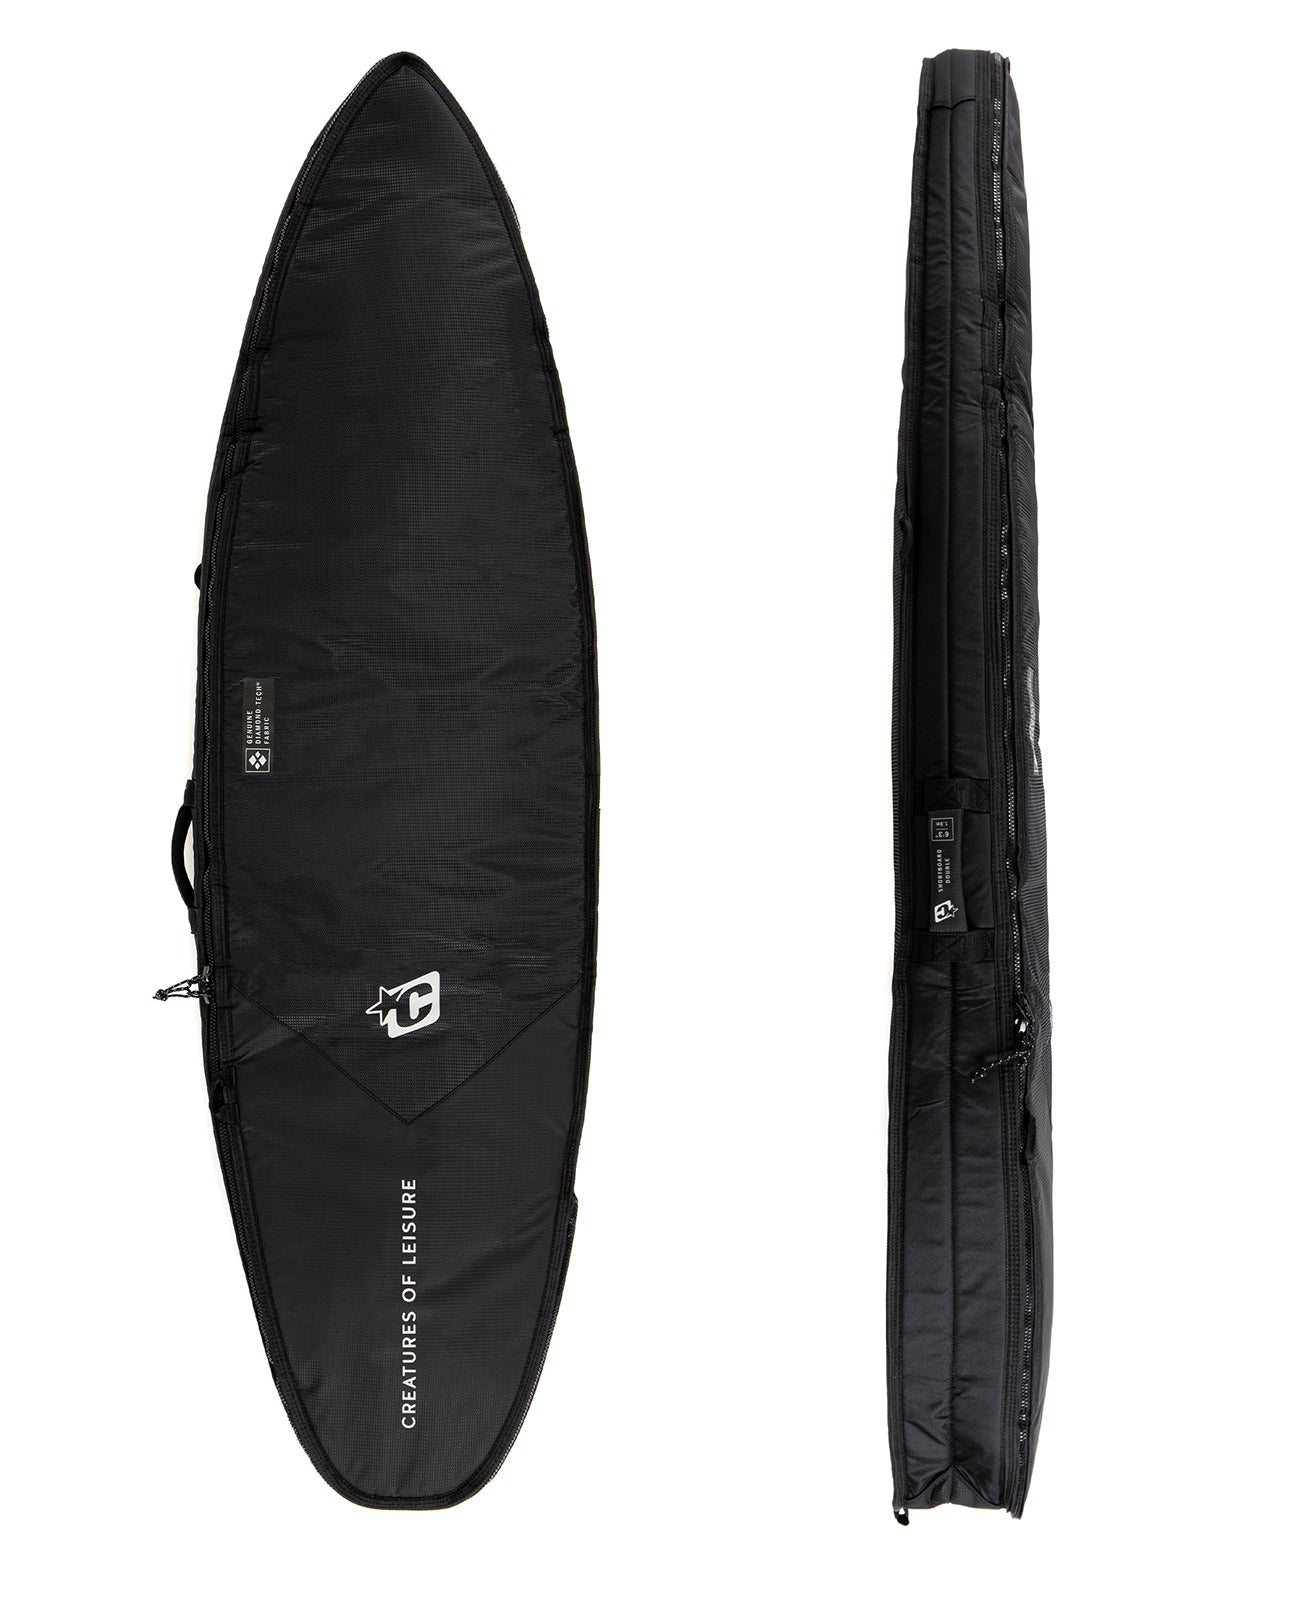 Creatures of Leisure Double DT2.0 Shortboard Boardbag Black-Silver 6ft3in